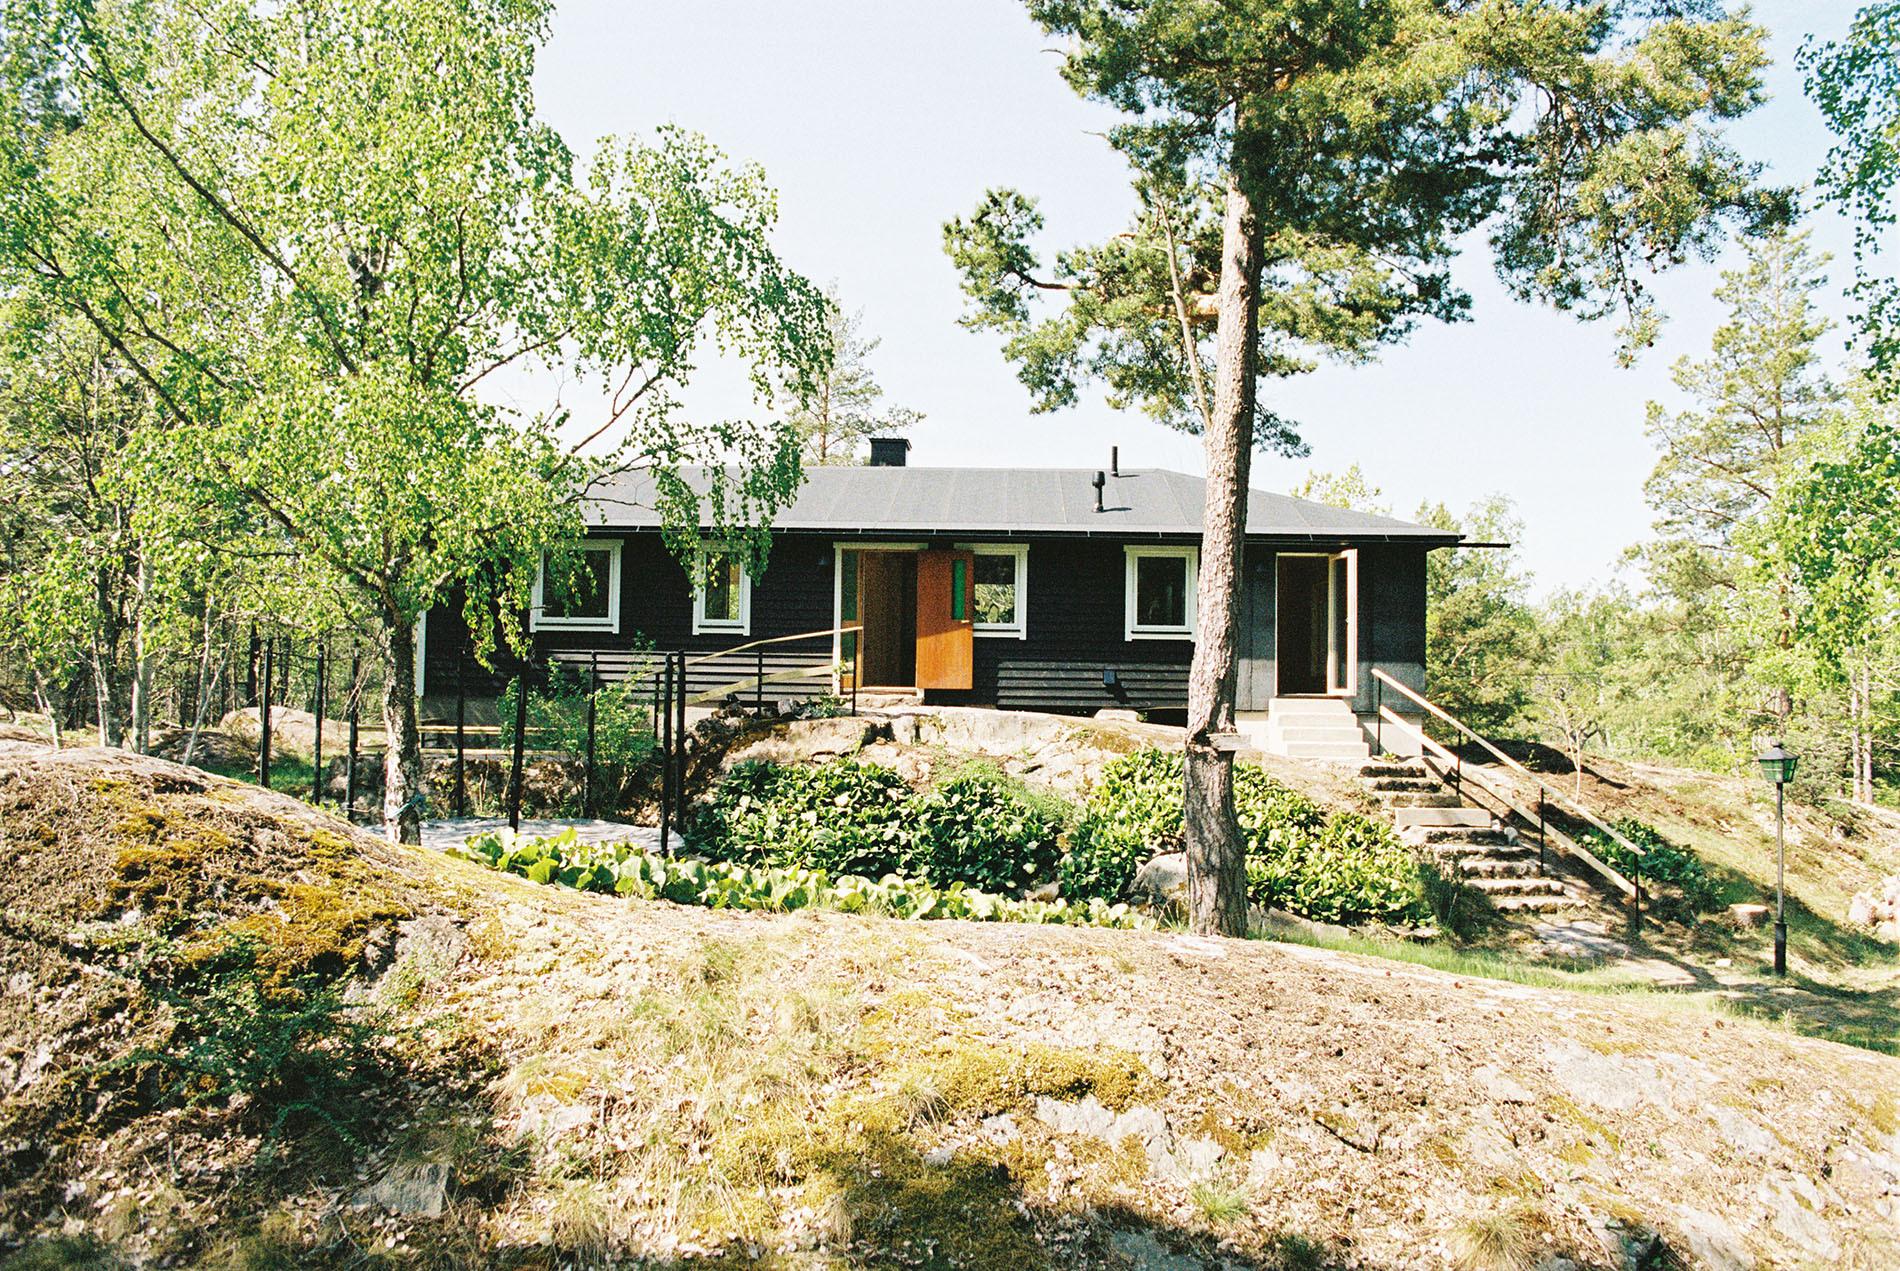 A low, dark-brown house on a rocky hill among some trees.